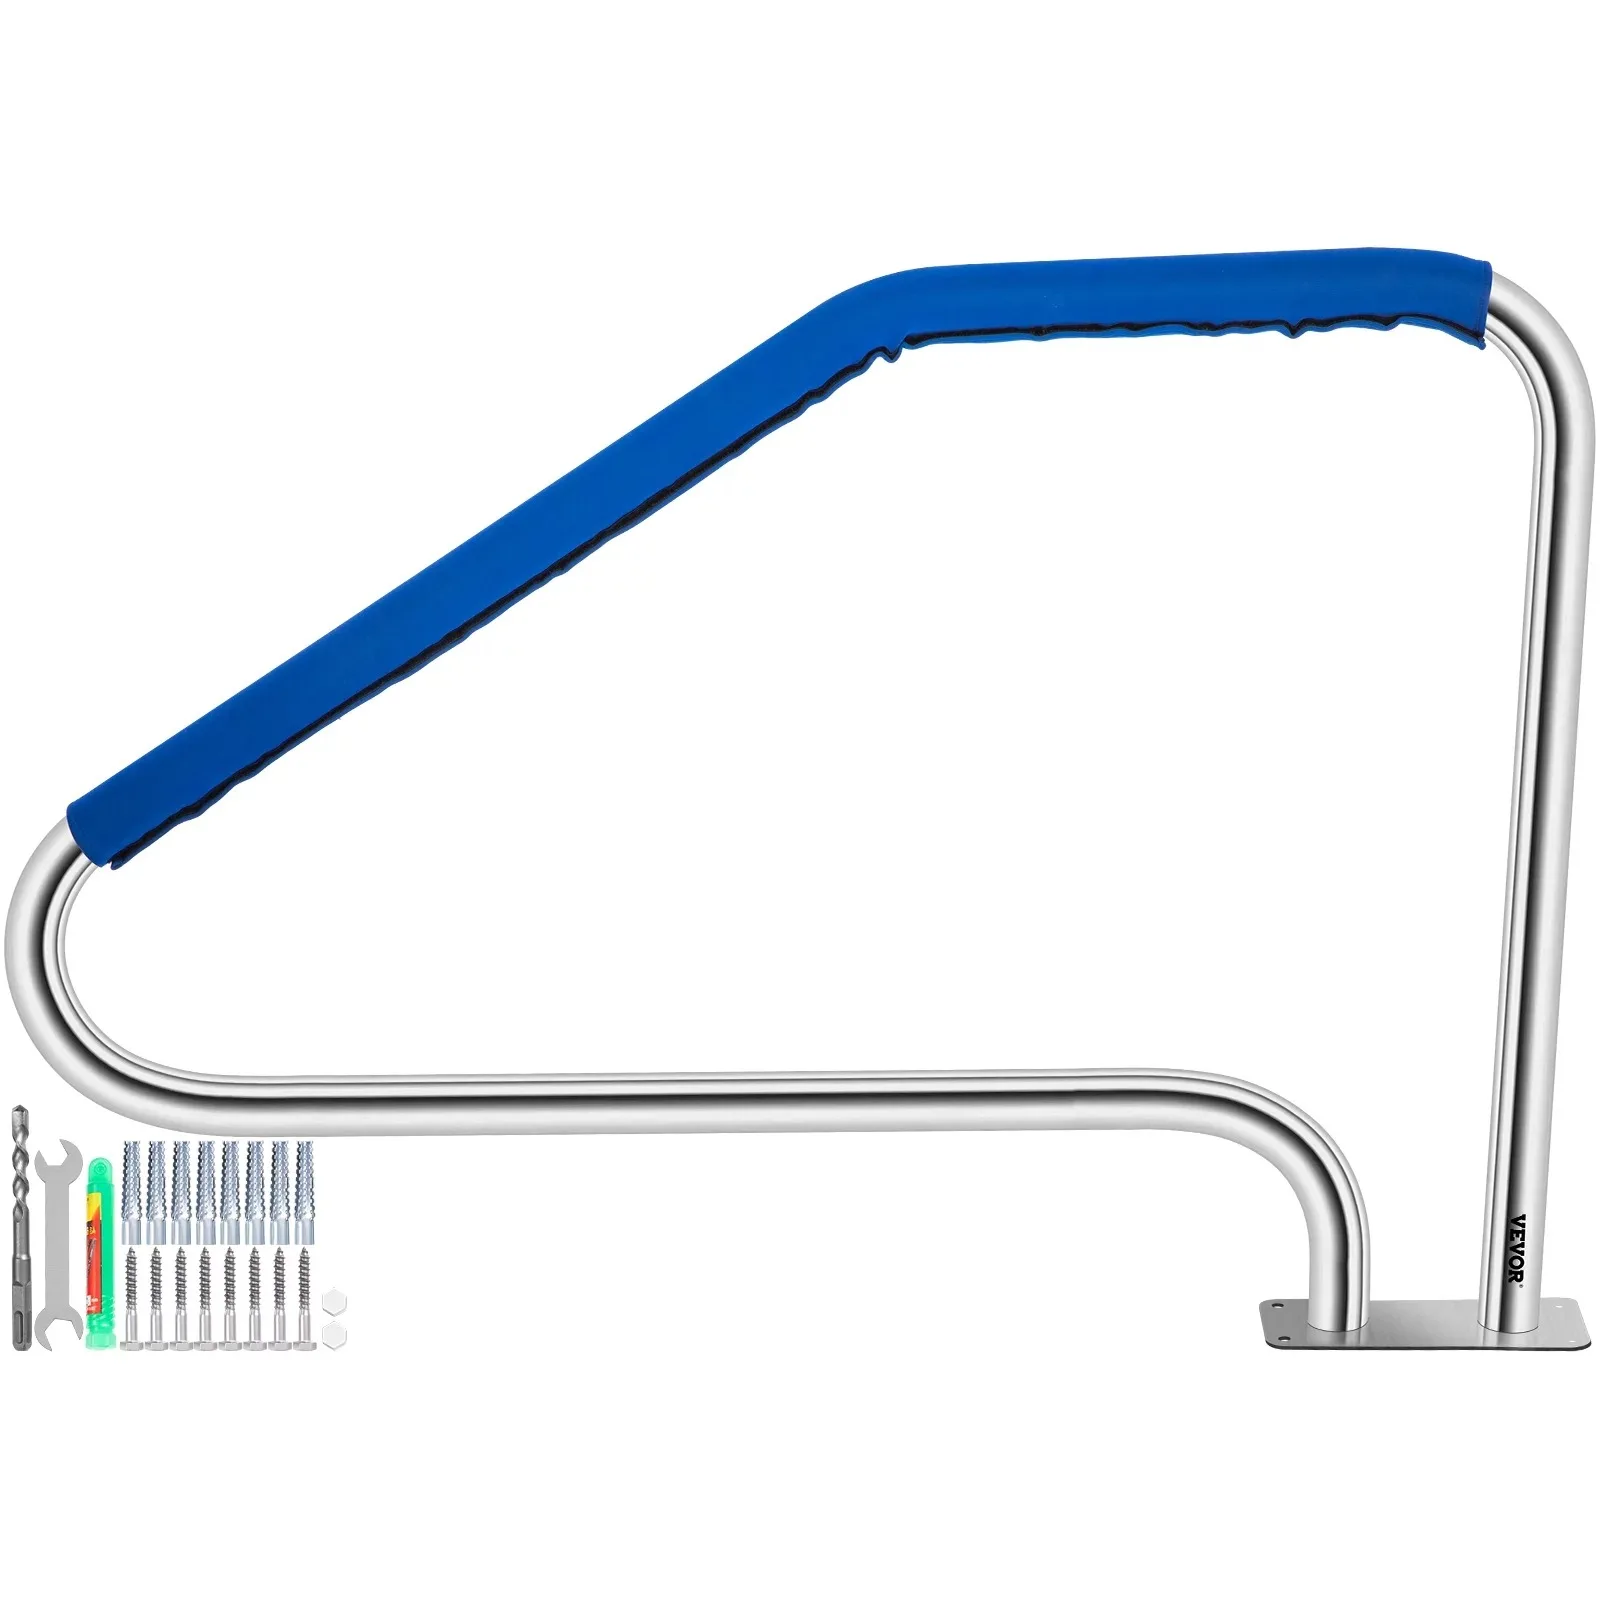 

49.4" x 34" Pool Handrail, 304 Stainless Steel Stair Pool Handrail with Rated Load Capacity of 375 lbs.